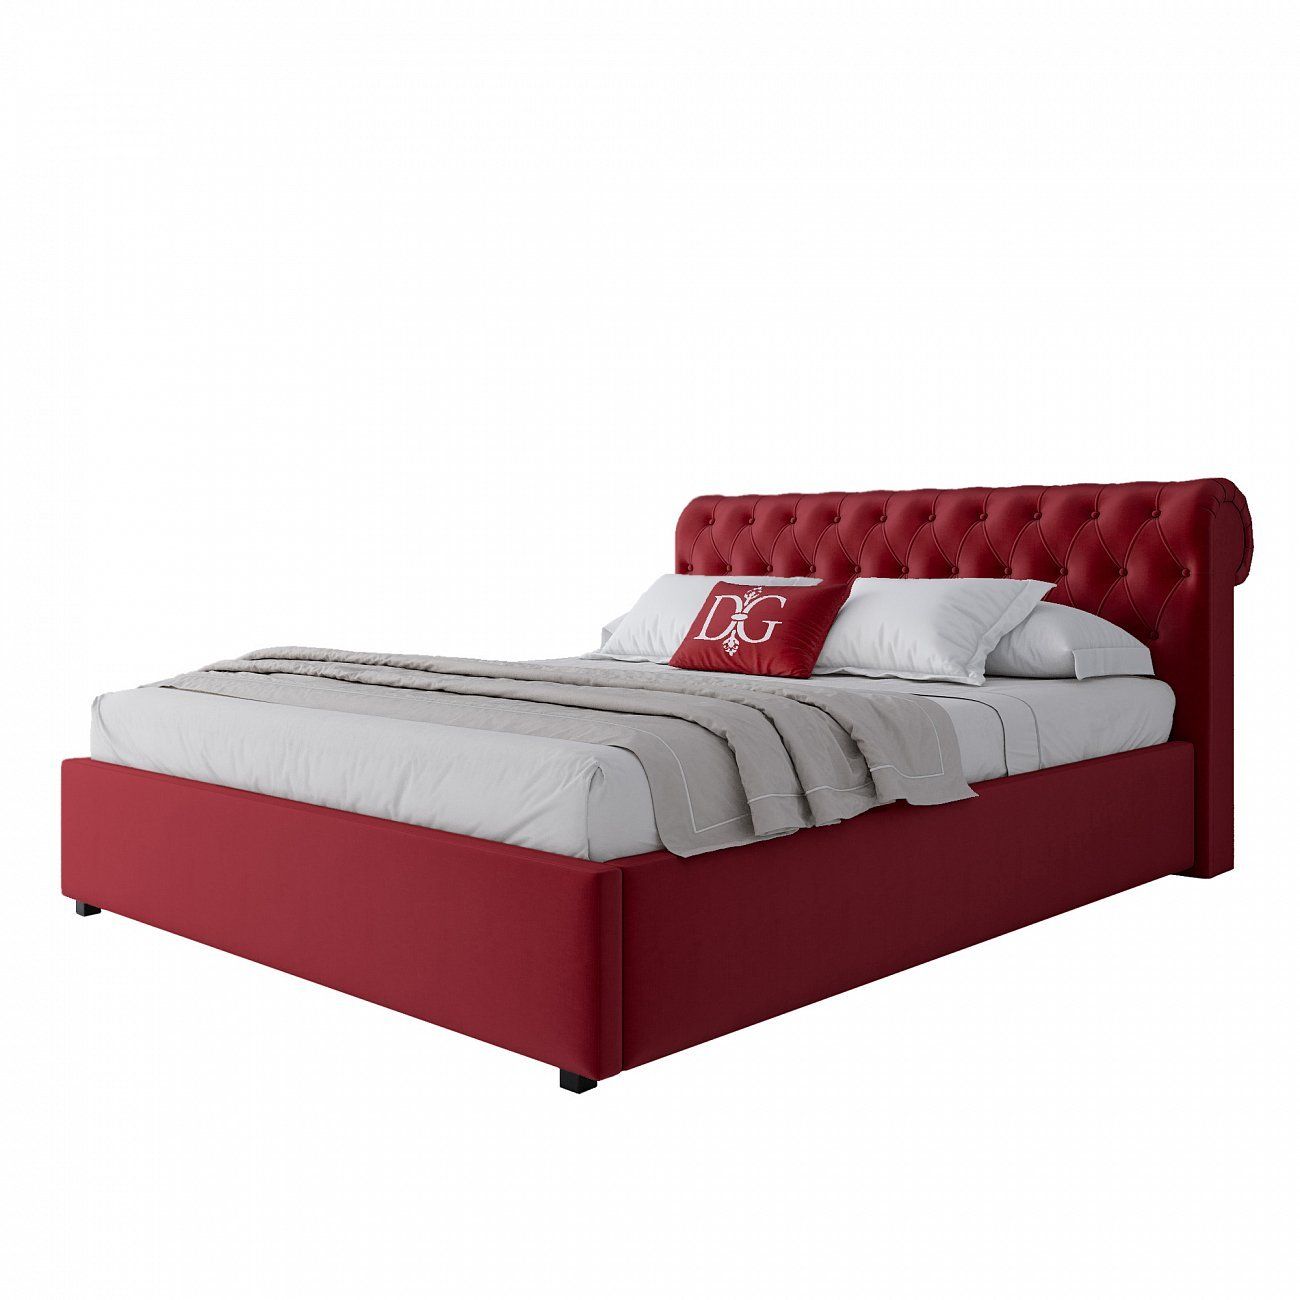 Double bed with upholstered headboard 160x200 cm red Sweet Dreams